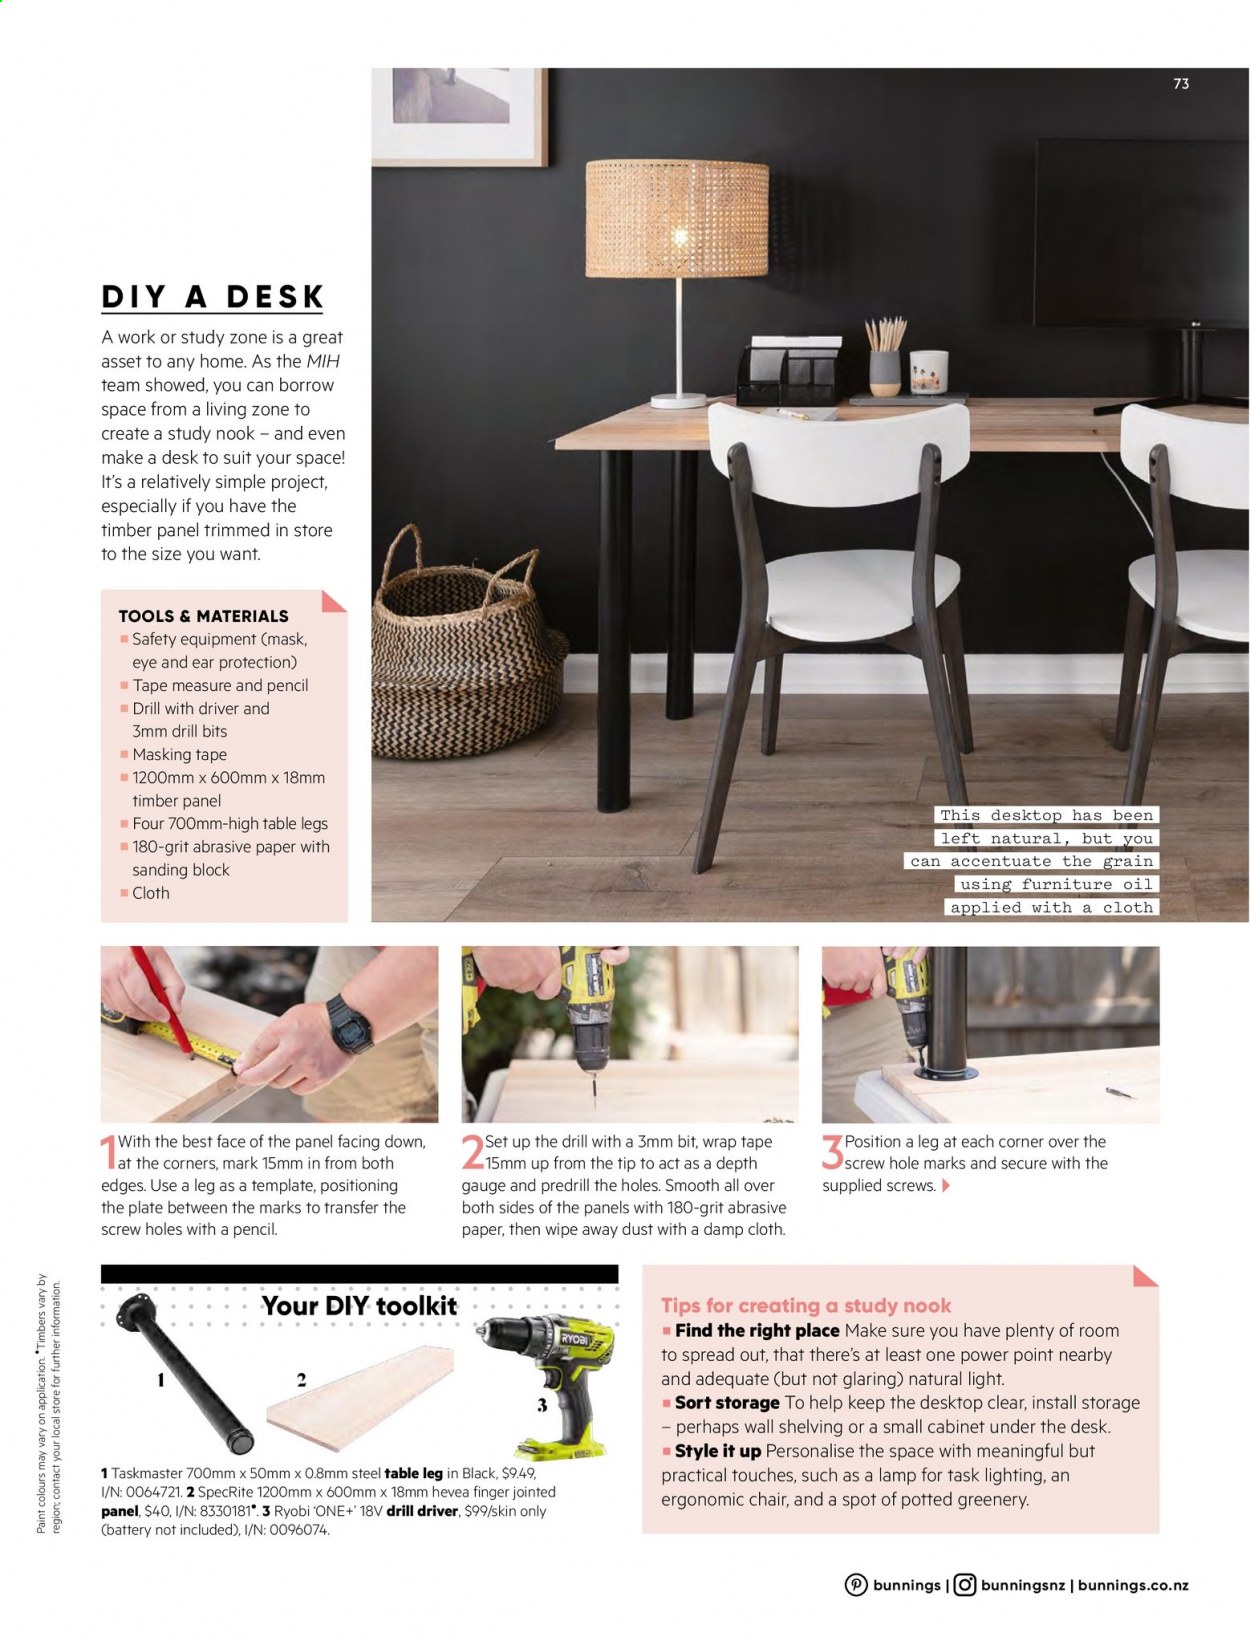 thumbnail - Bunnings Warehouse mailer - Sales products - cabinet, table leg, chair, battery, masking tape, paint, lamp, drill, Ryobi, measuring tape. Page 73.